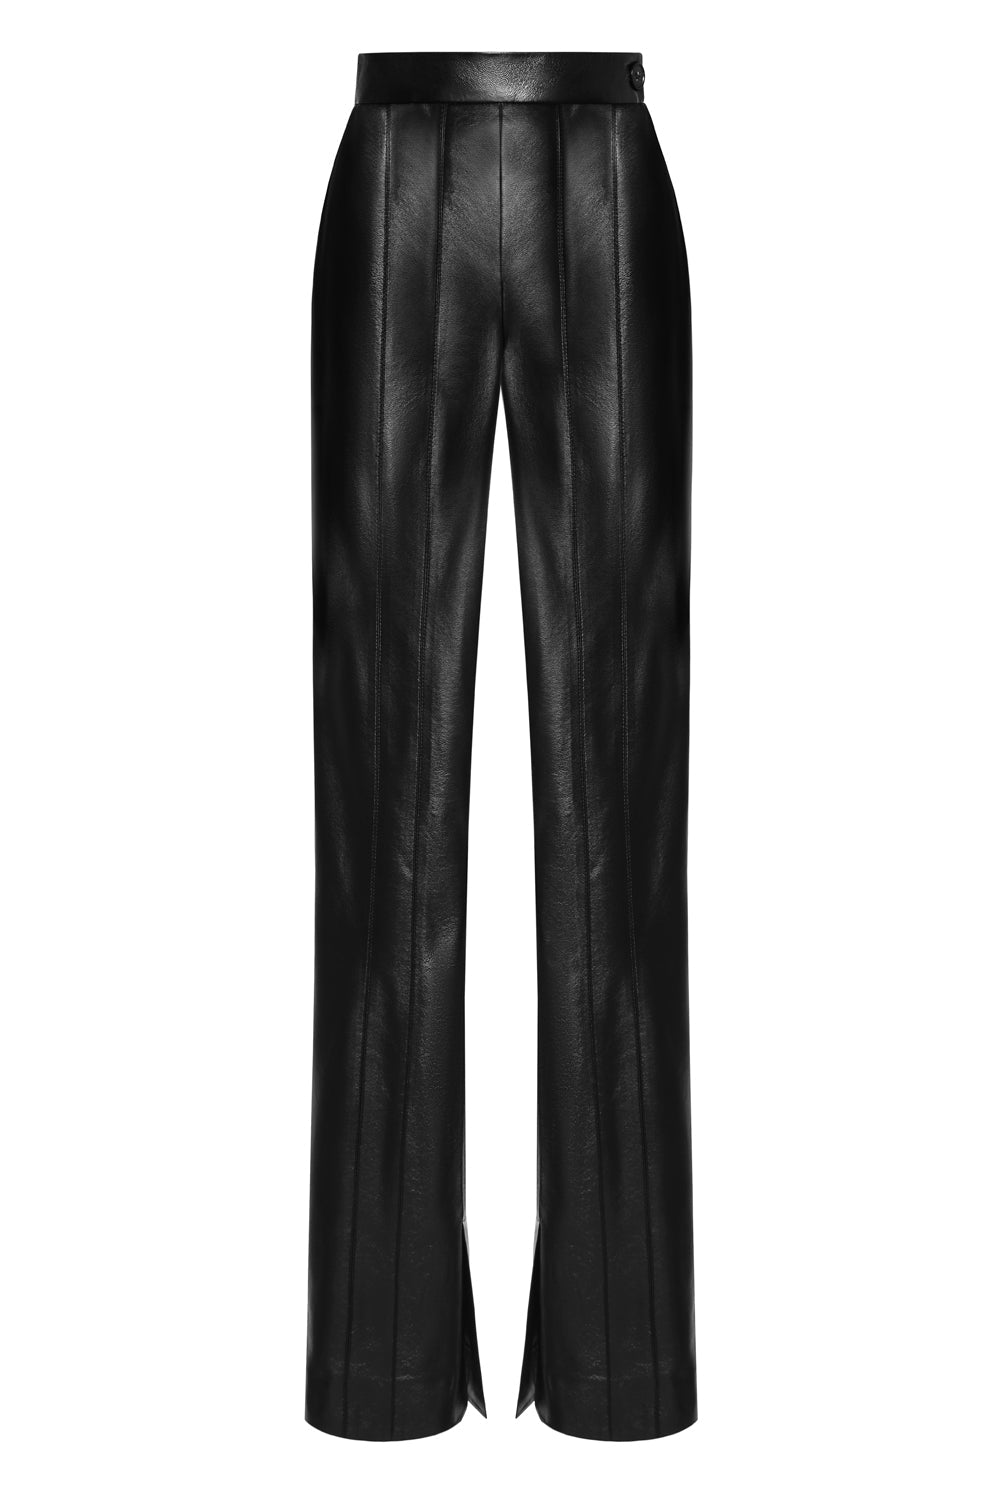 Eco Leather Double Stitched Pants